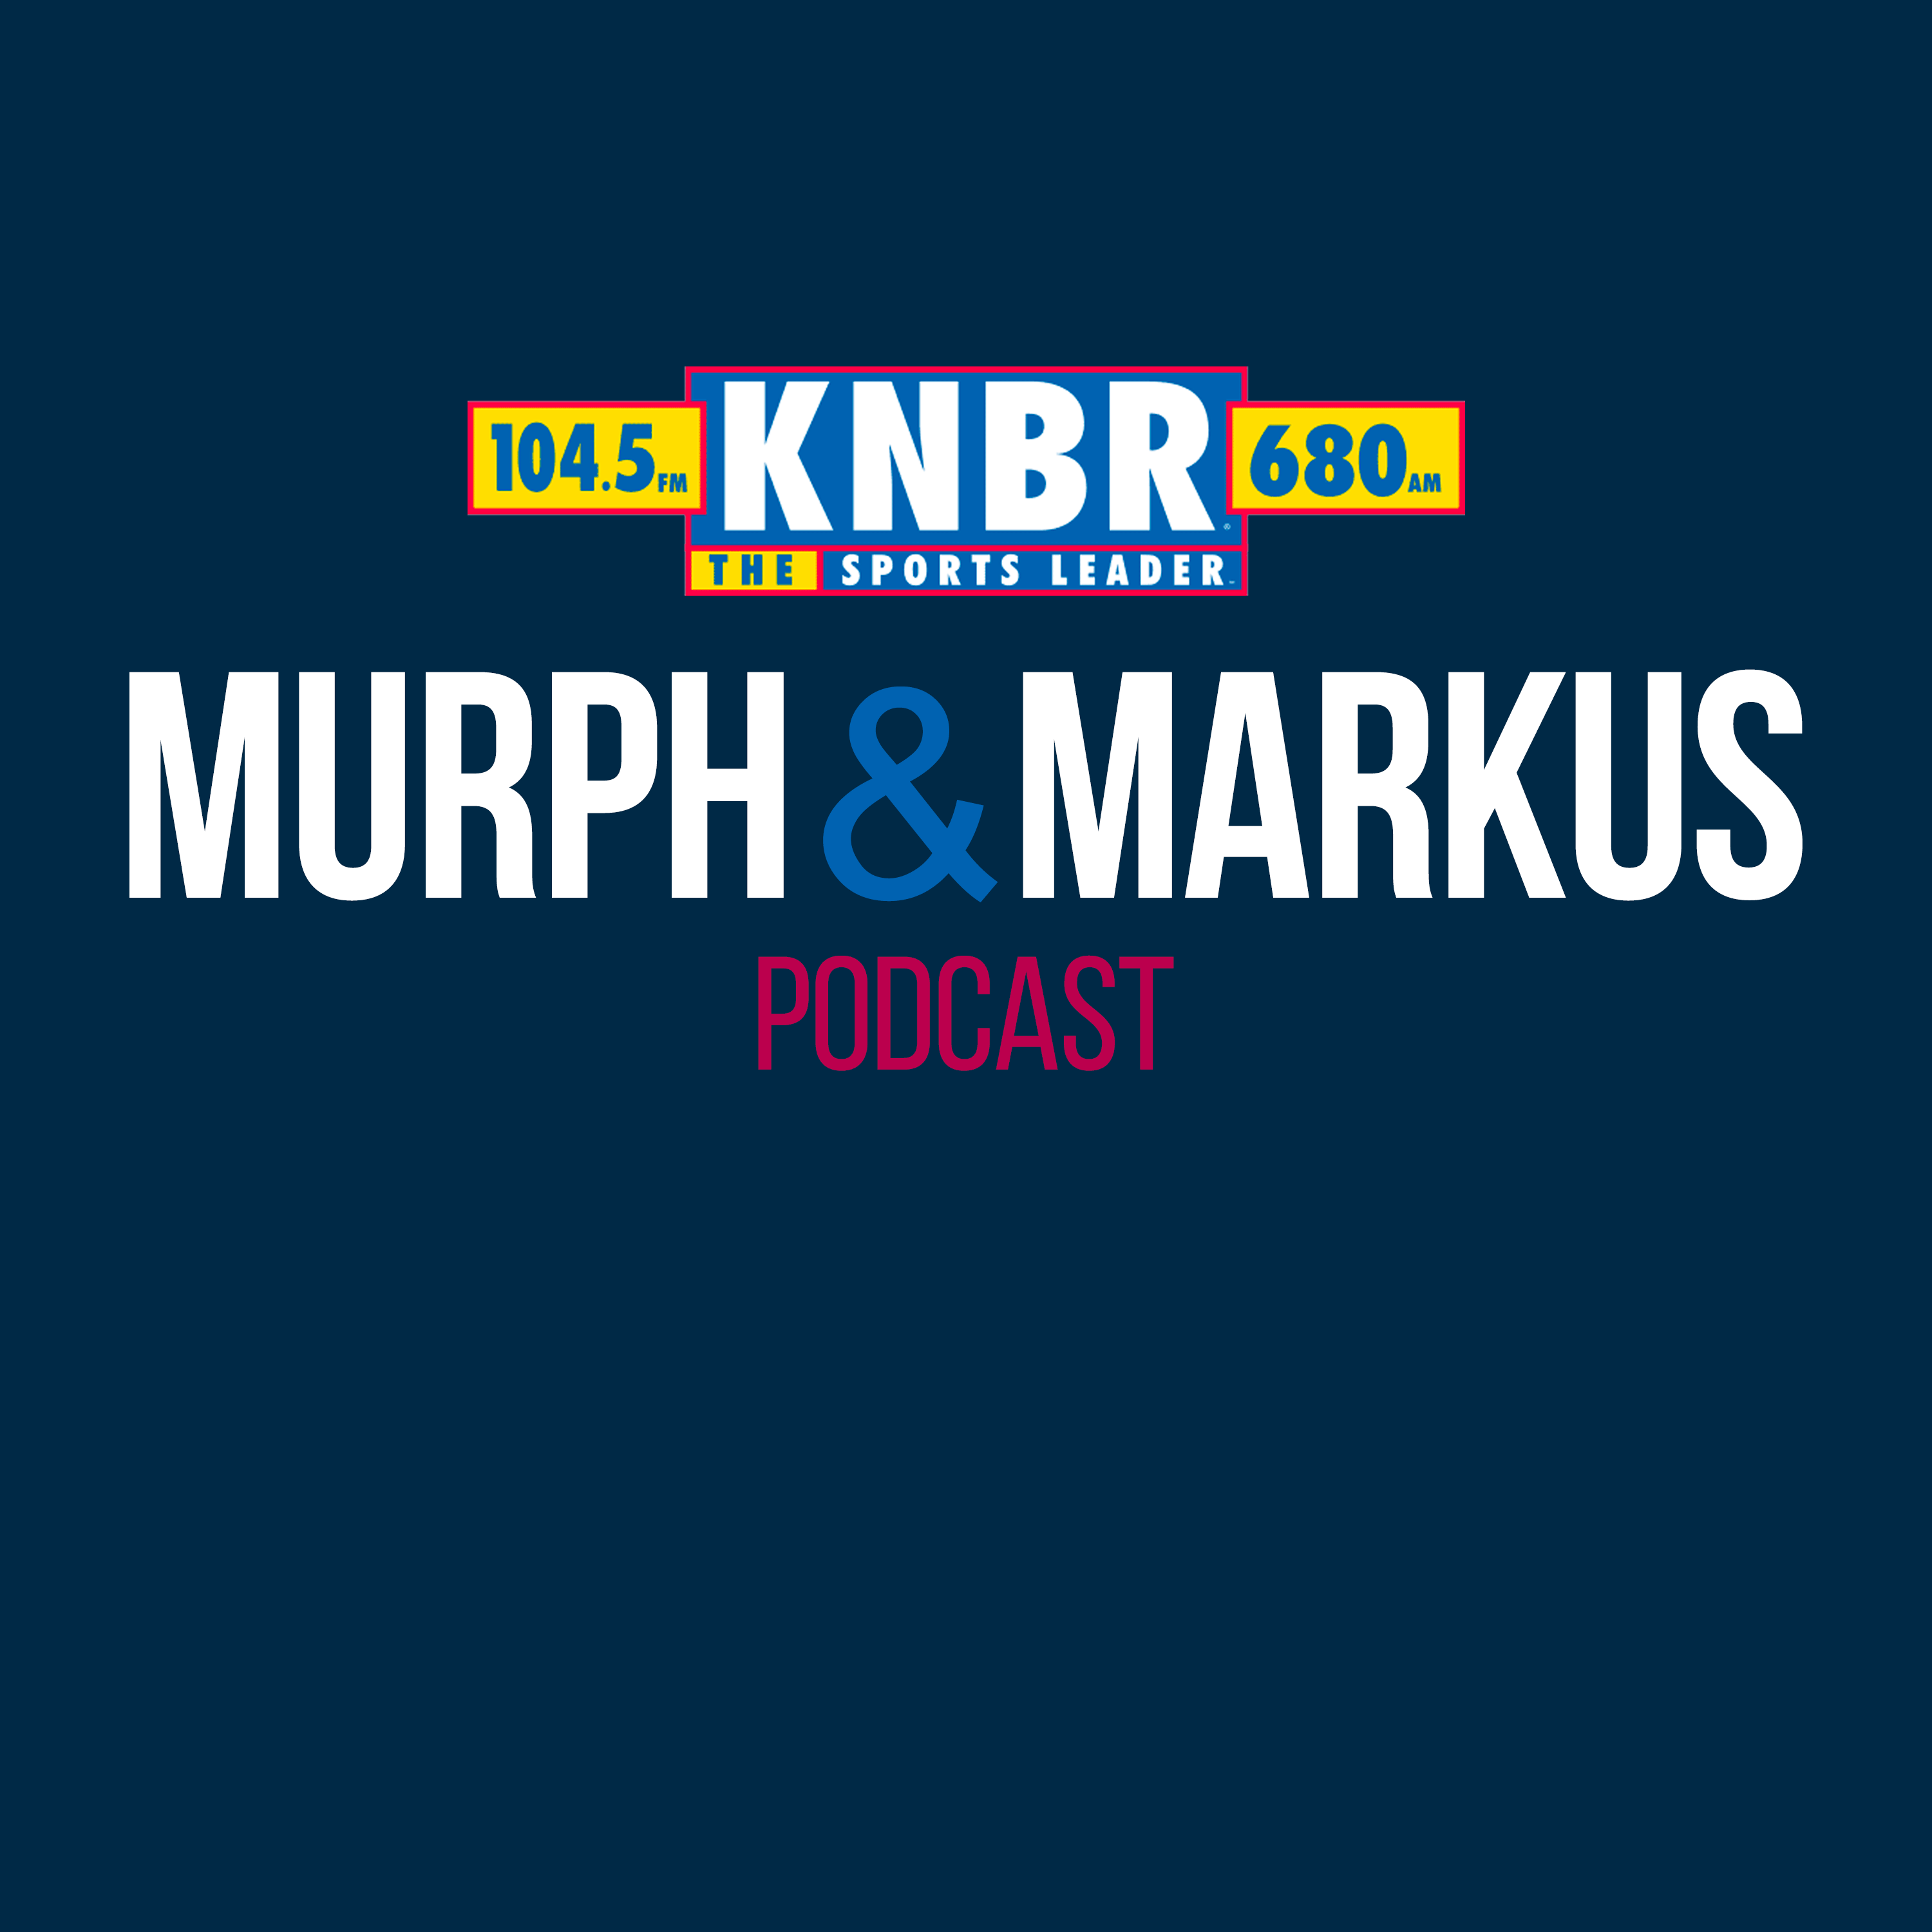 4-5 Jon Miller joins Murph & Markus to share a story about Jung Hoo Lee and analyze the Giants' now strong defense